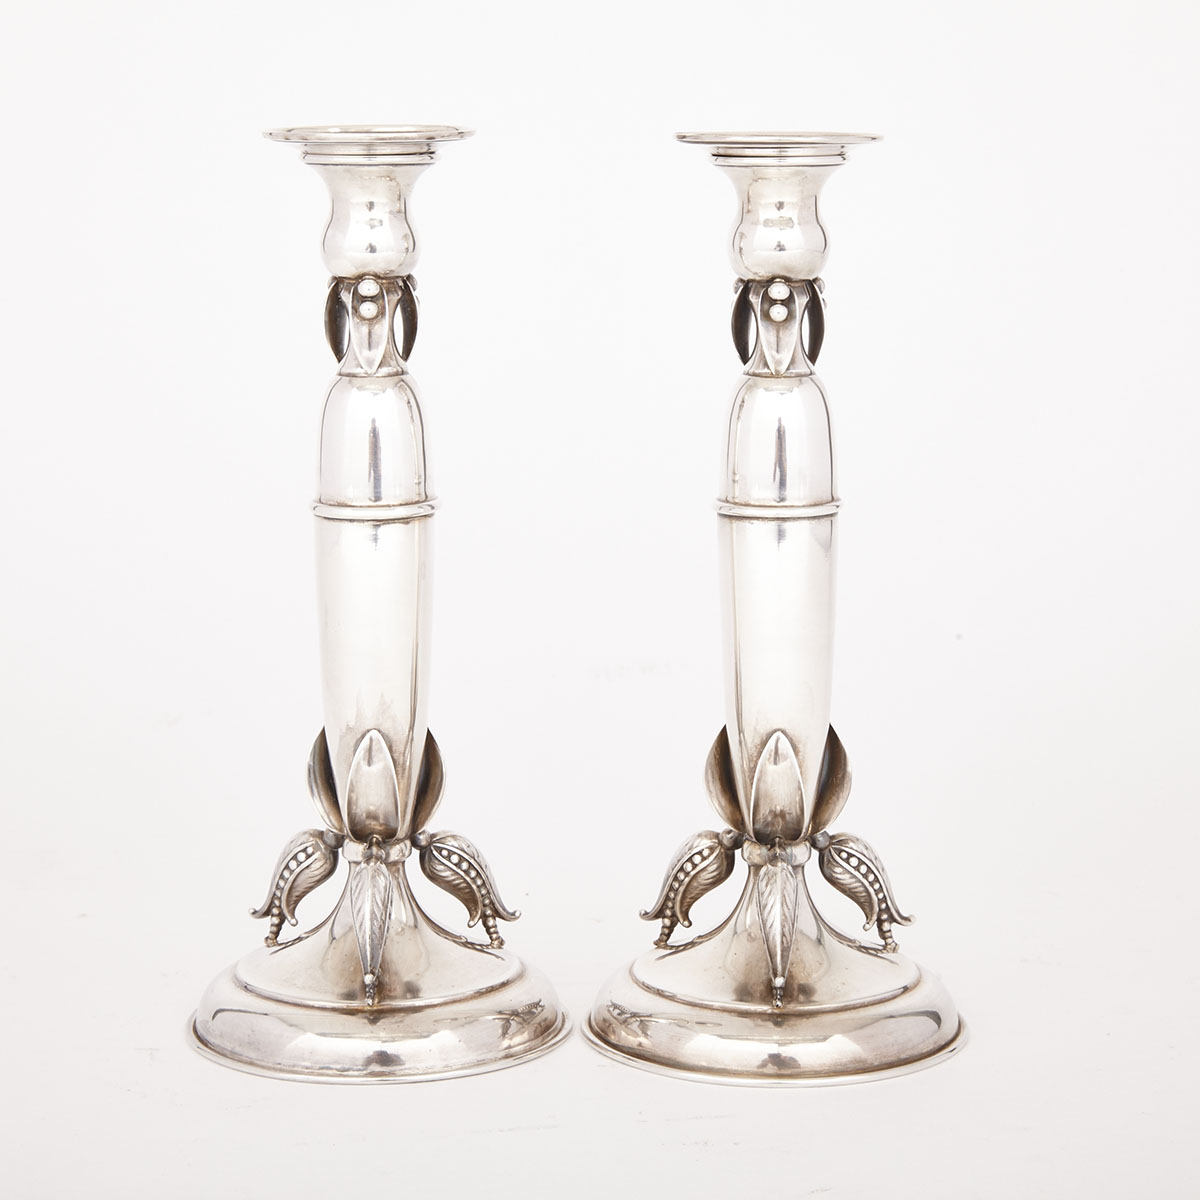 Pair of Canadian Silver Candlesticks, Carl Poul Petersen, Montreal, Que., c.1935-53 